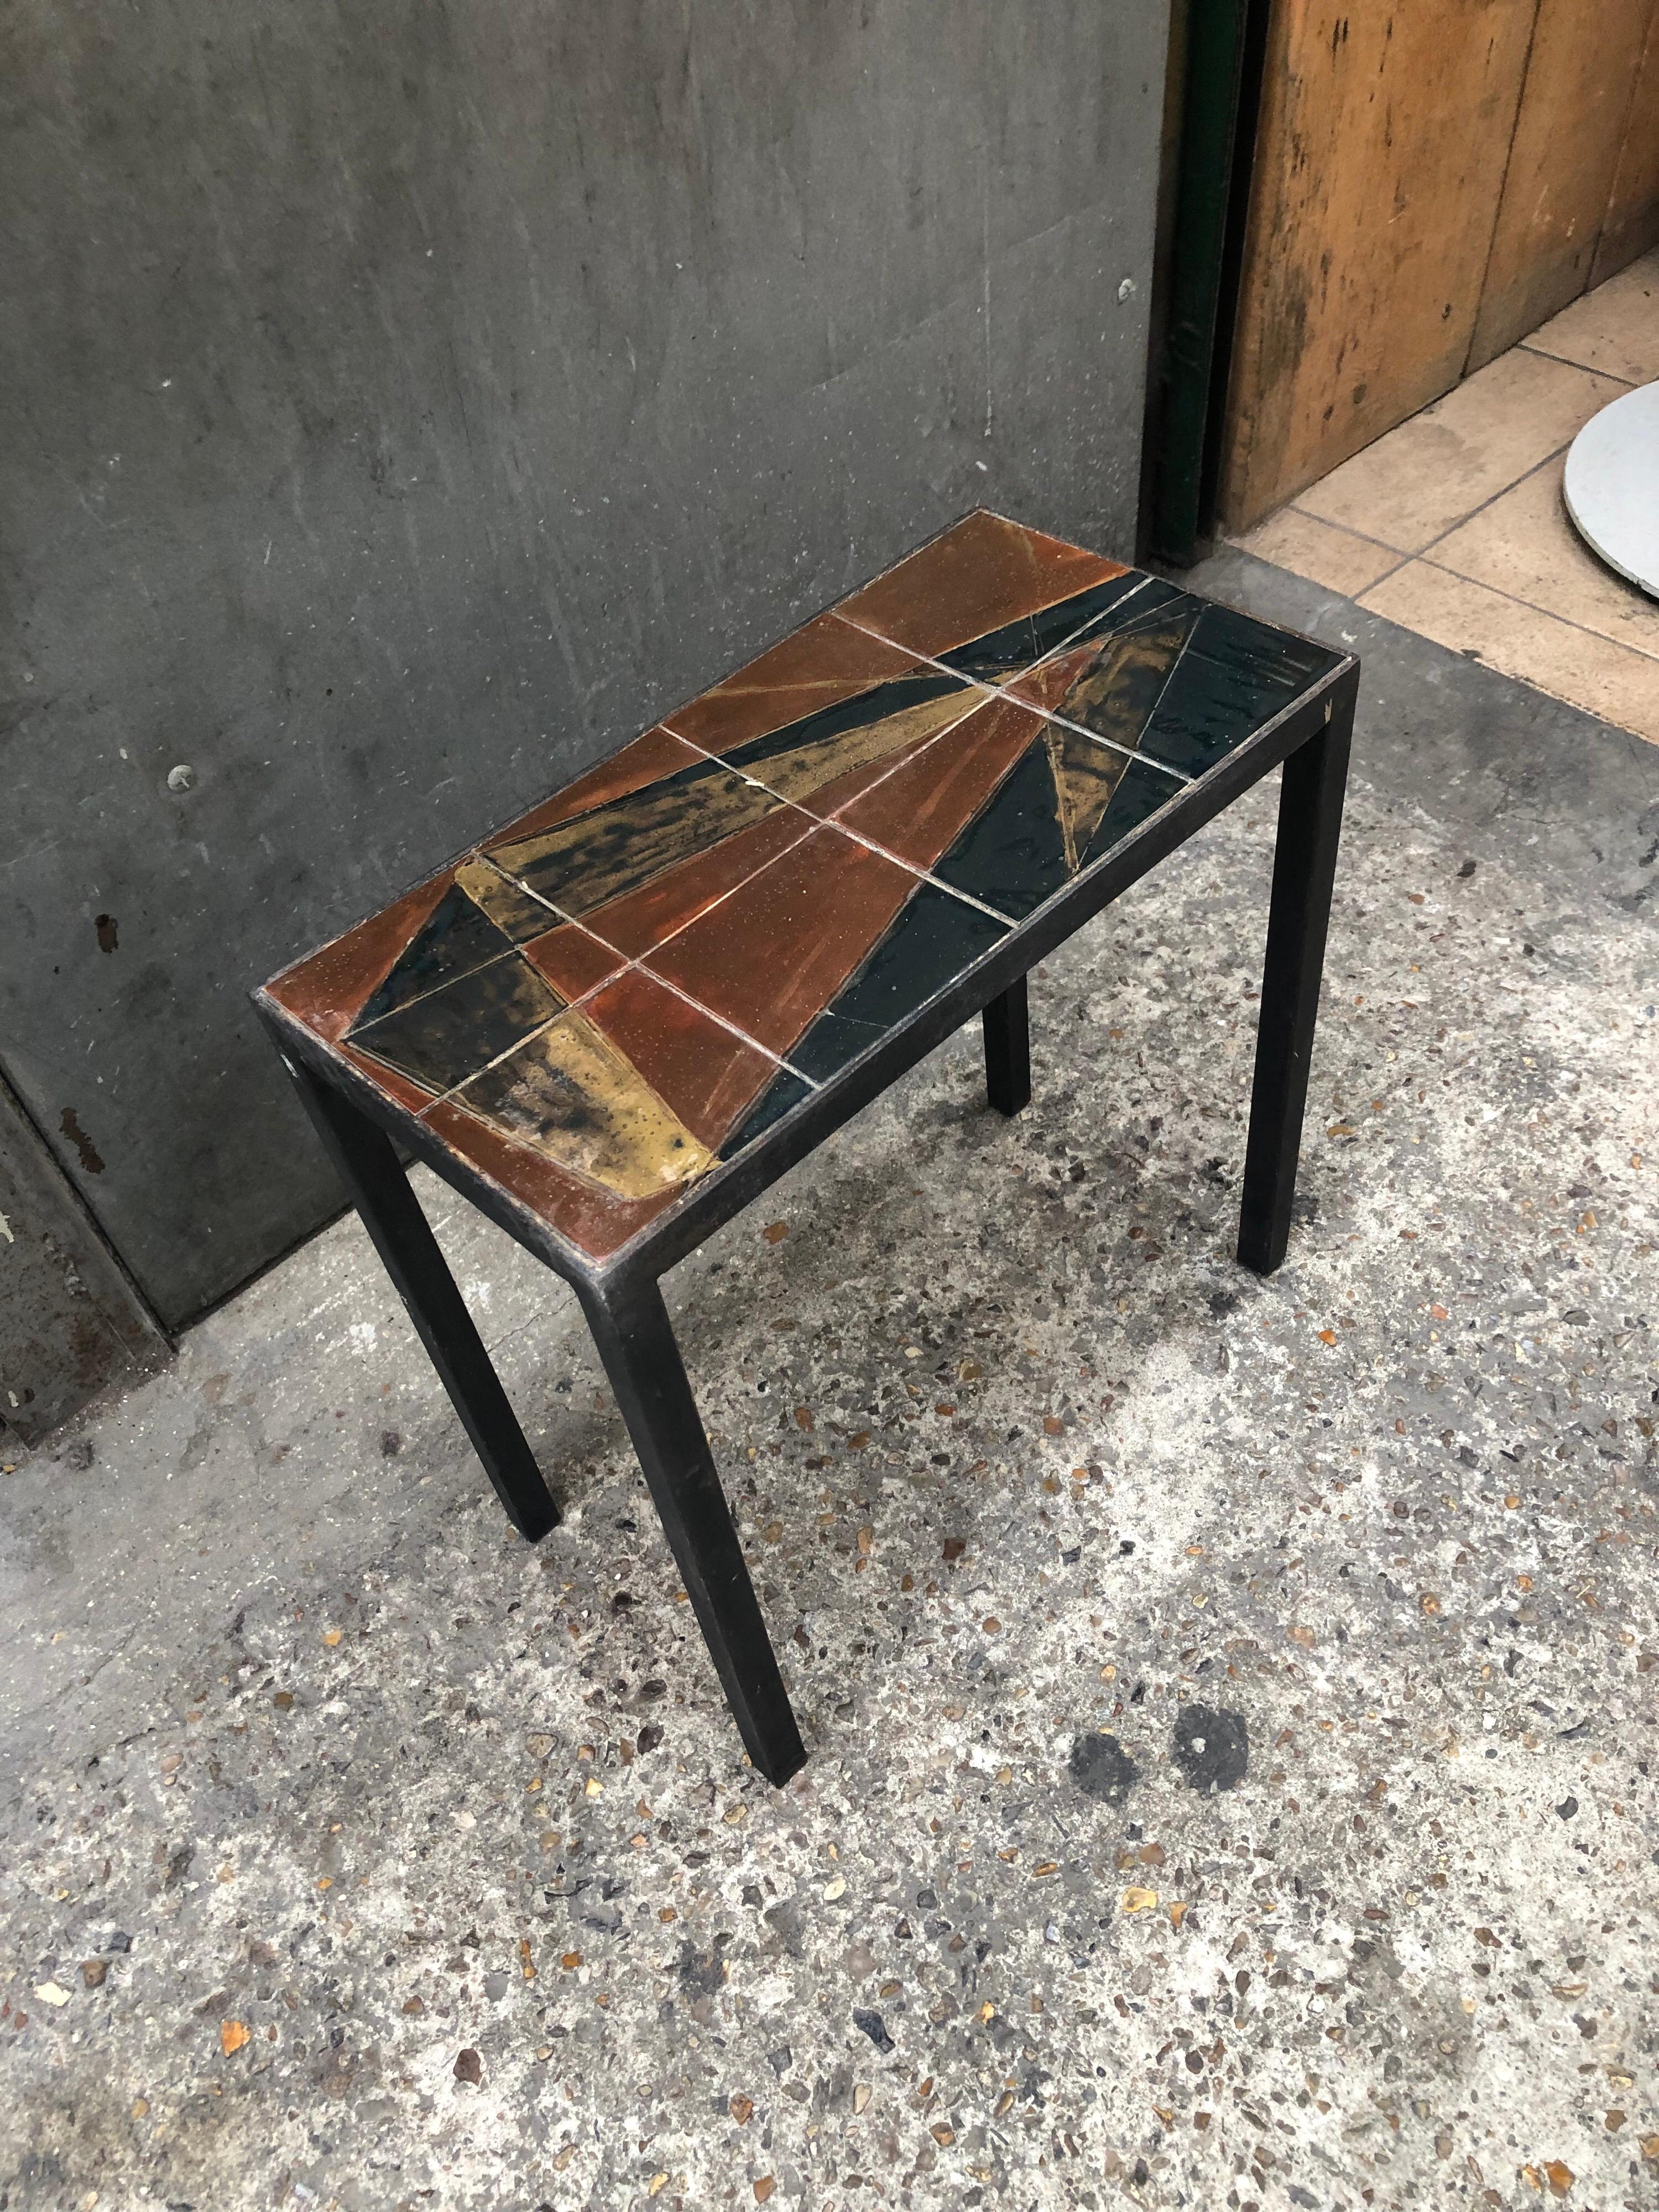 An exquisite end table, circa 1960 in ceramic and base in black lacquered steel
the ceramic is in very good shape black and gold are dominated the cubist design
no signature on the ceramic but a little mark can be seen.